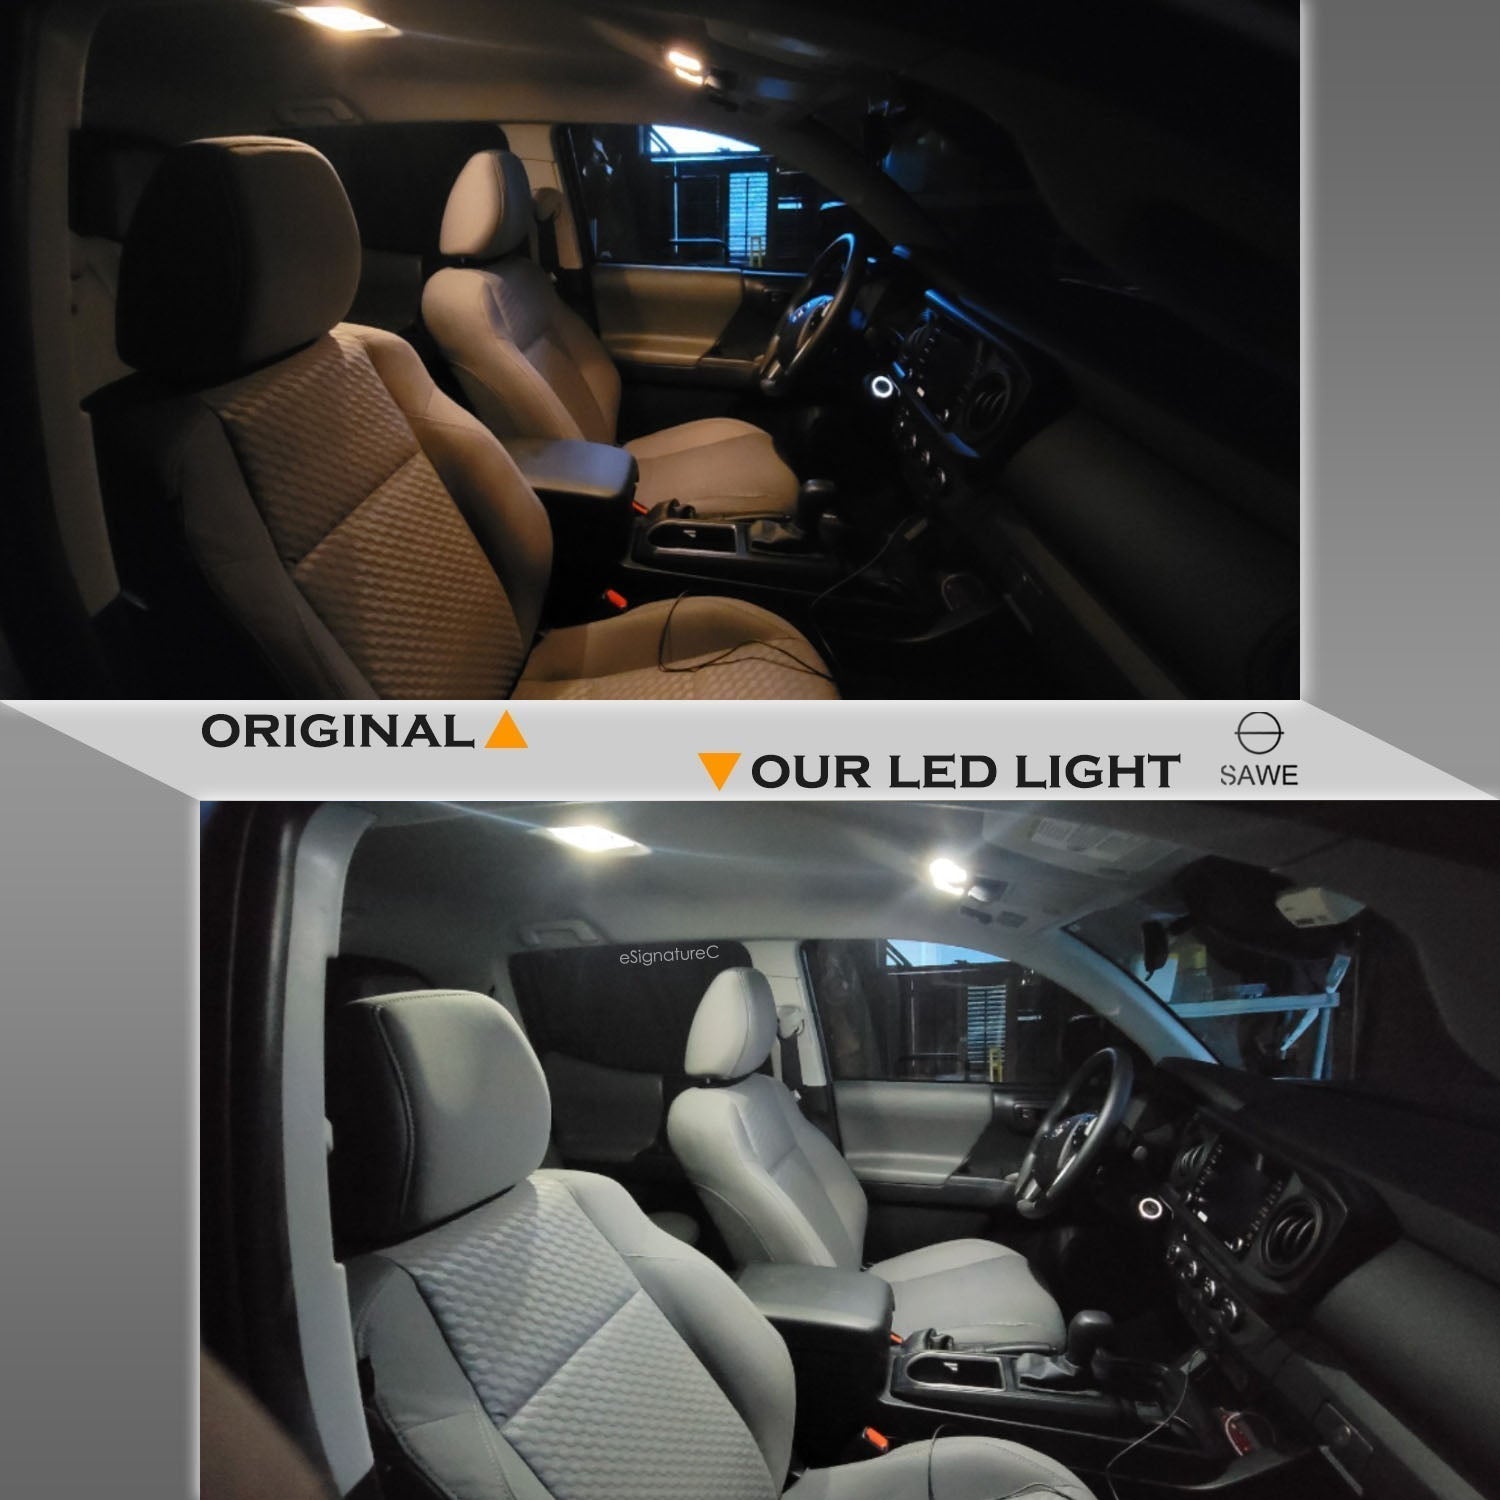 For Ford Expedition Interior LED Lights - Dome & Map Light Bulbs Package Kit for 1997 - 2002 - White